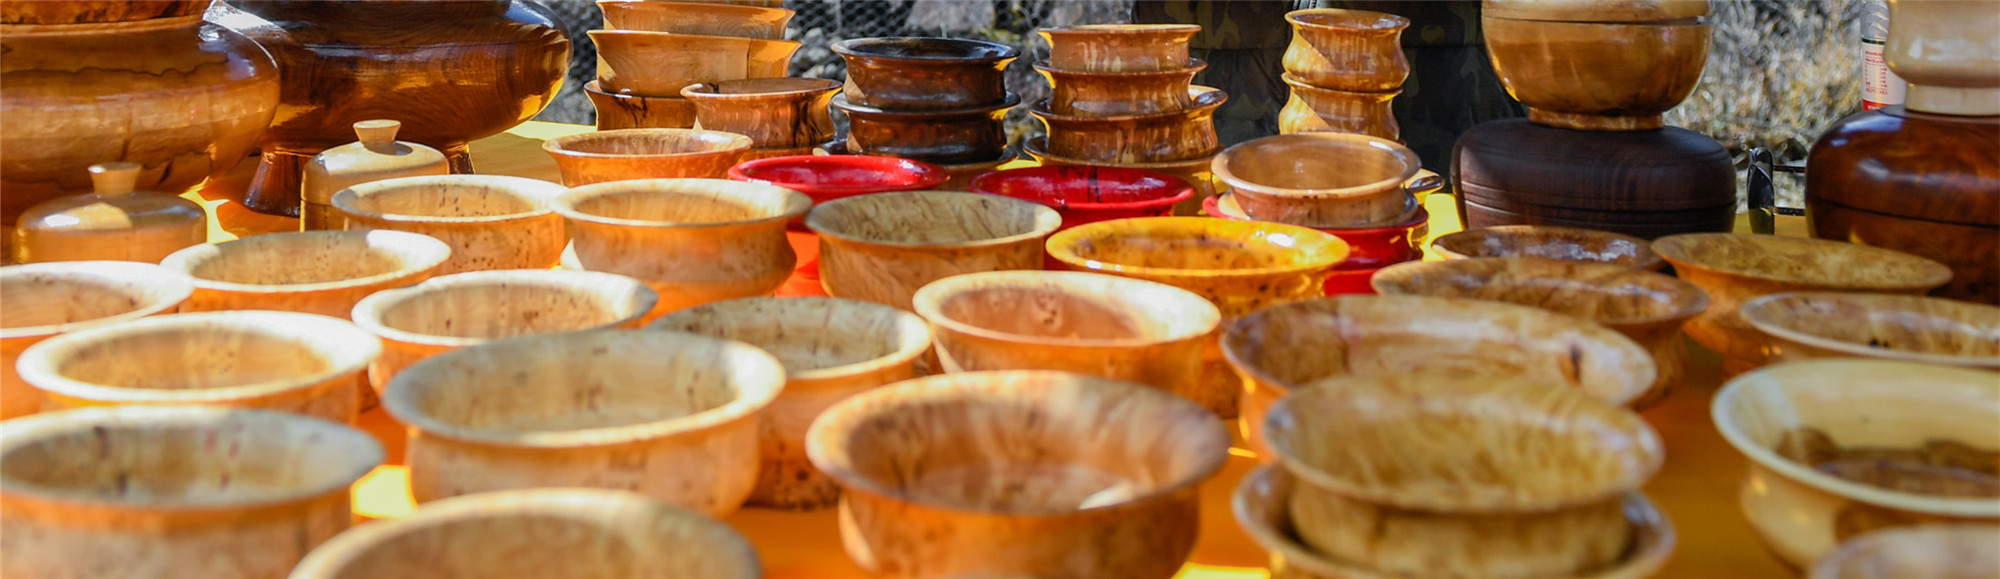 Apart from taking photos, seeking for the favorite Tibetan local specialties and souvenirs is a memory of joy as well.